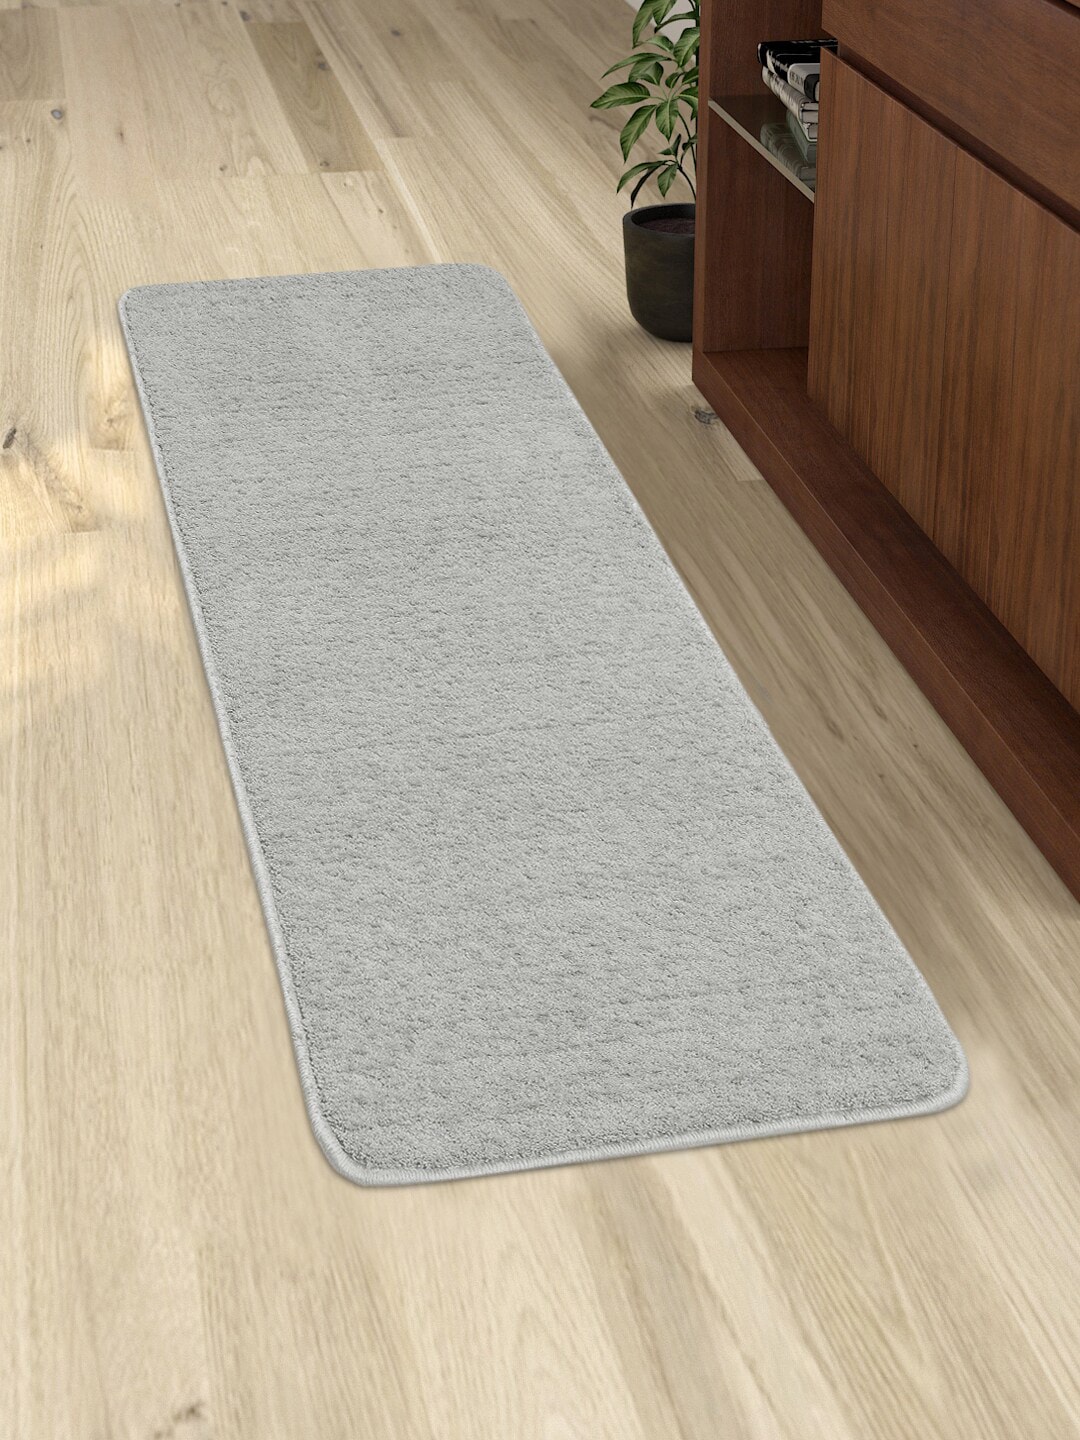 Saral Home Grey Solid Neo Shaggy Anti-Skid Floor Runner Price in India